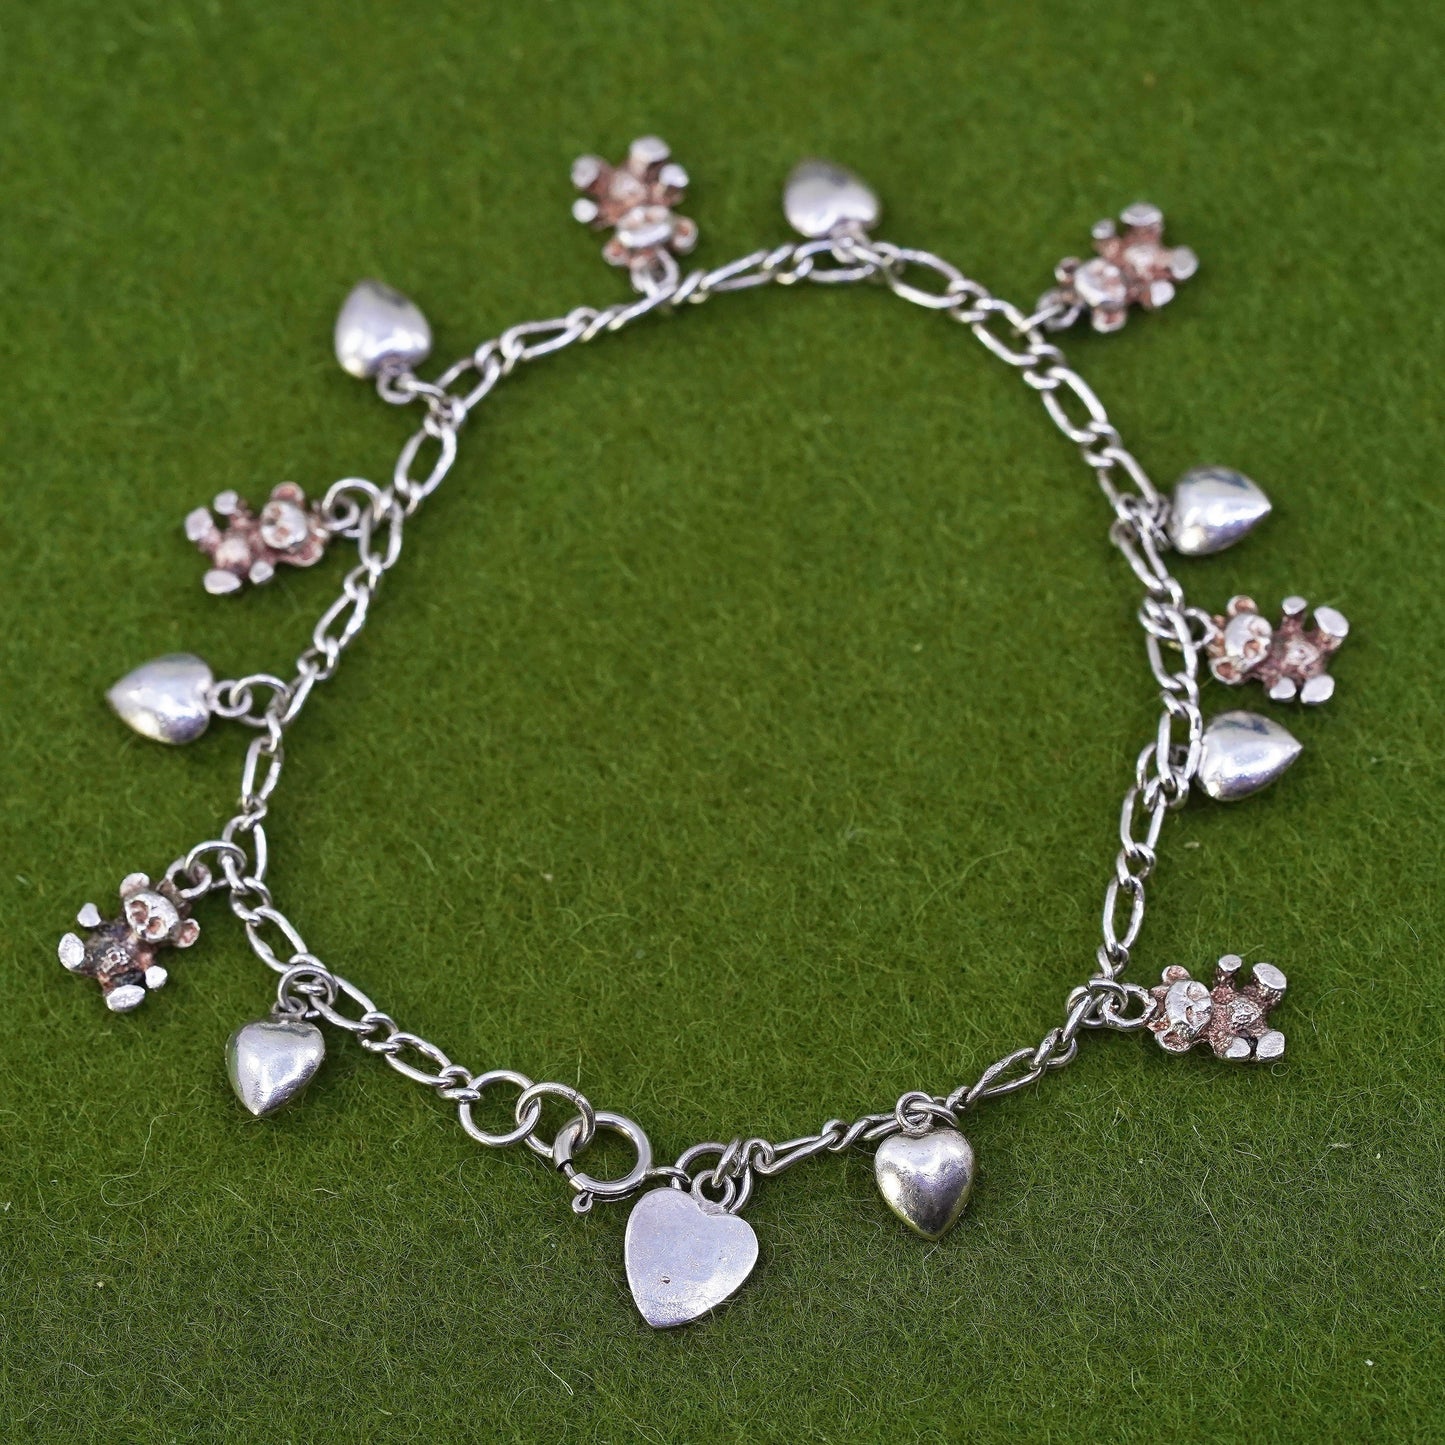 7", Vintage sterling 925 silver figaro bracelet with heart teddy bear charms